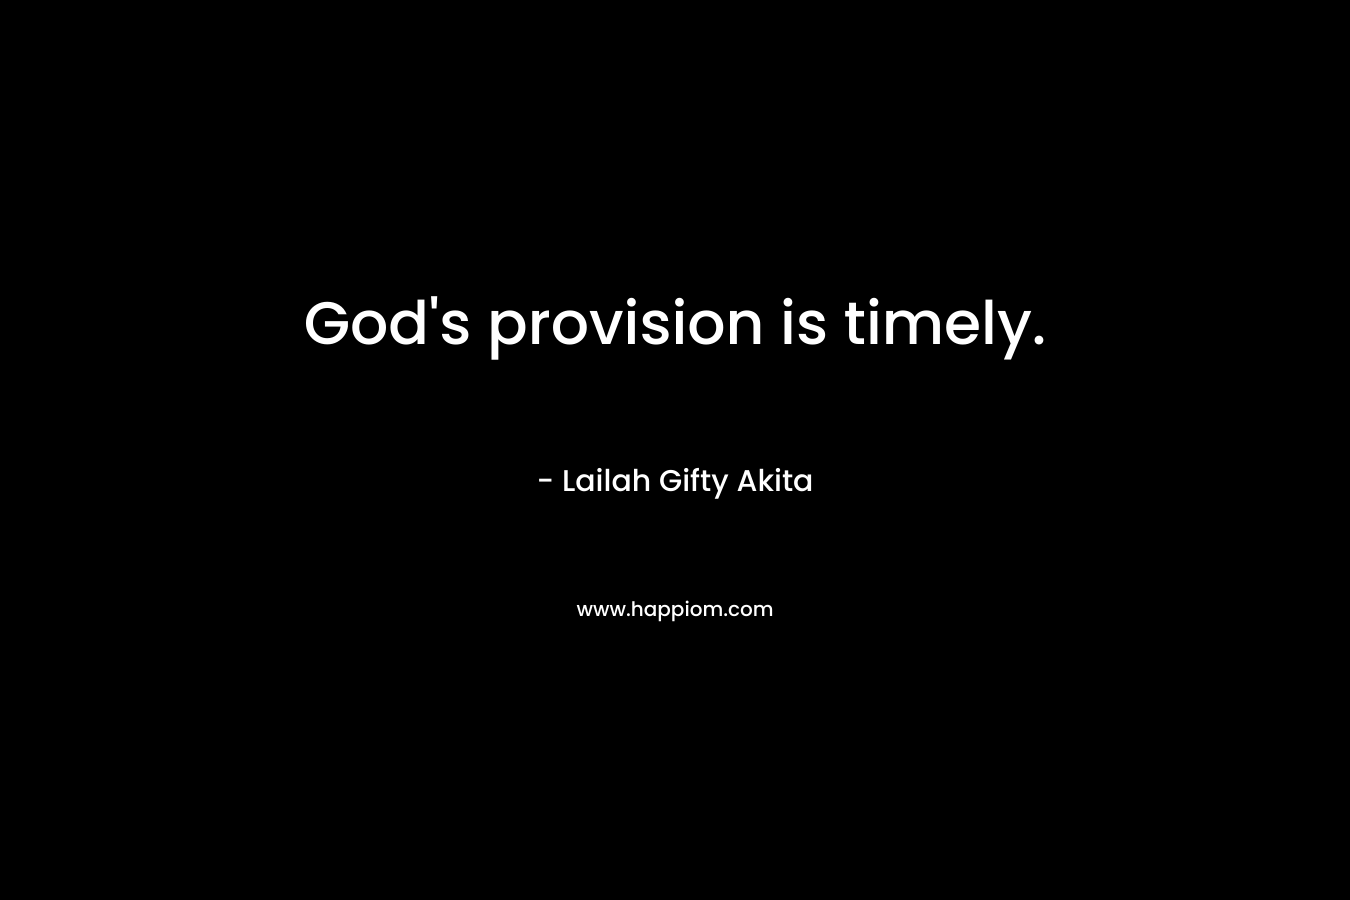 God's provision is timely.